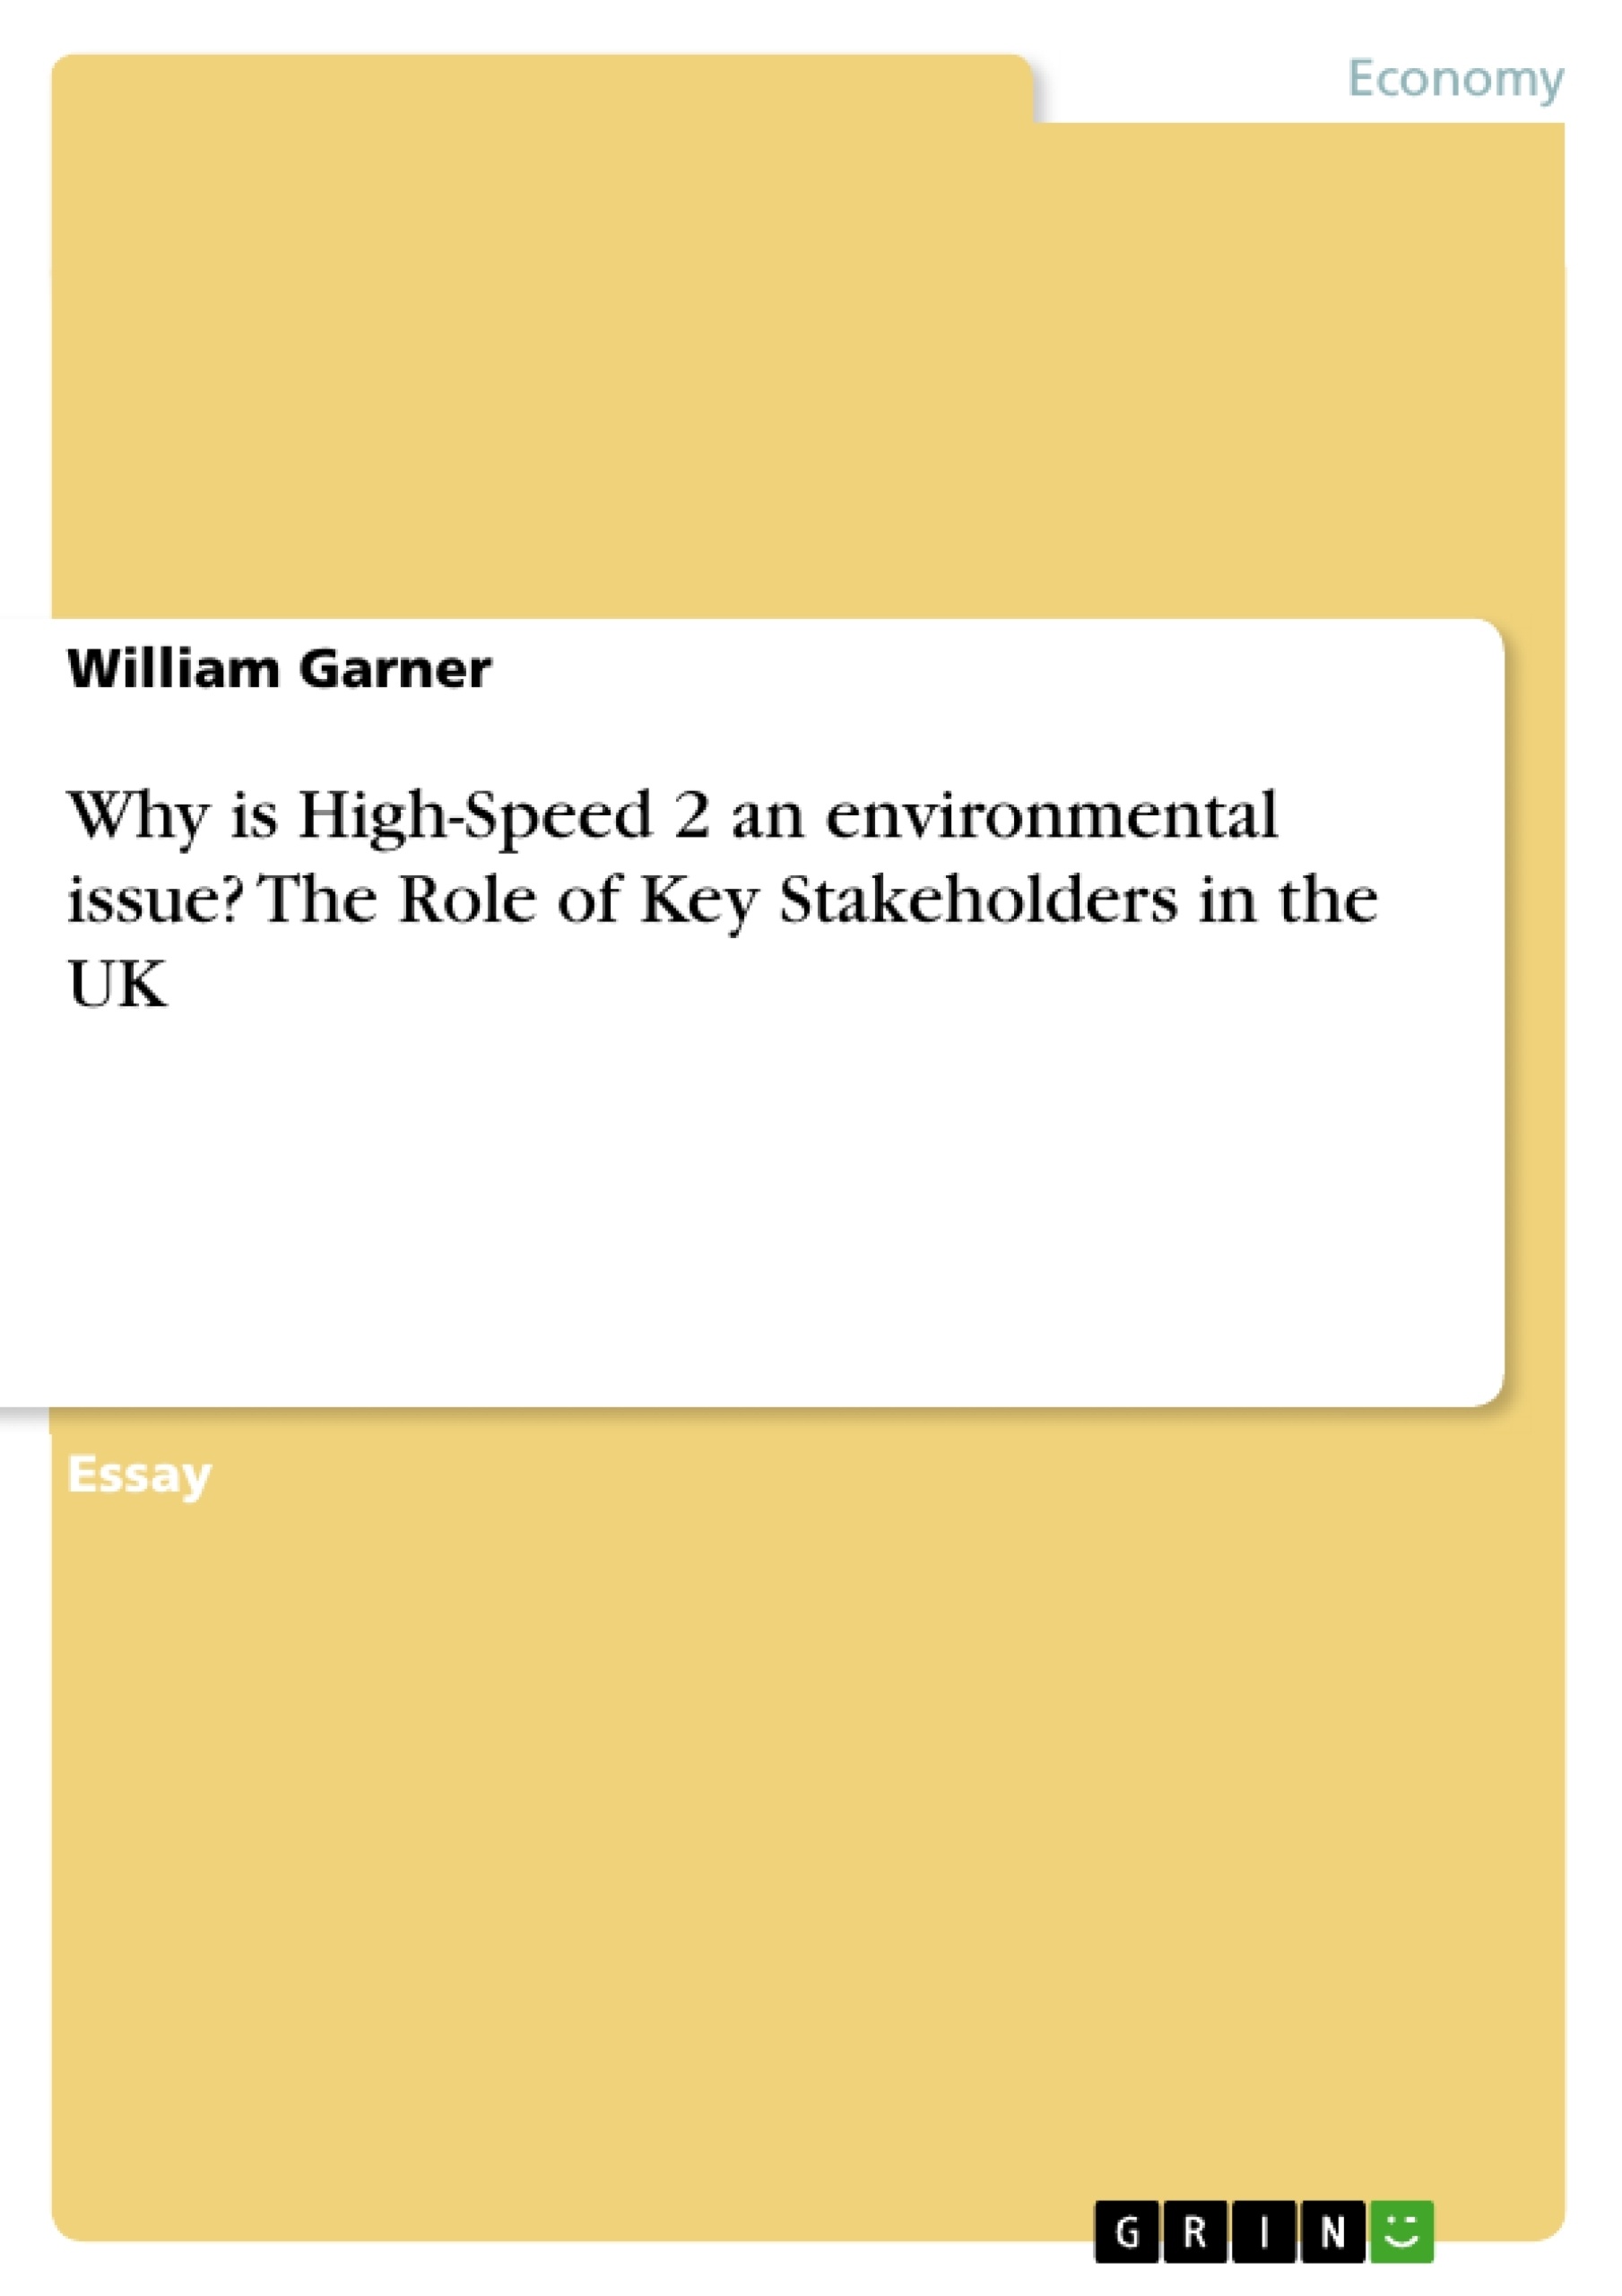 Titre: Why is High-Speed 2 an environmental issue? The Role of Key Stakeholders in the UK